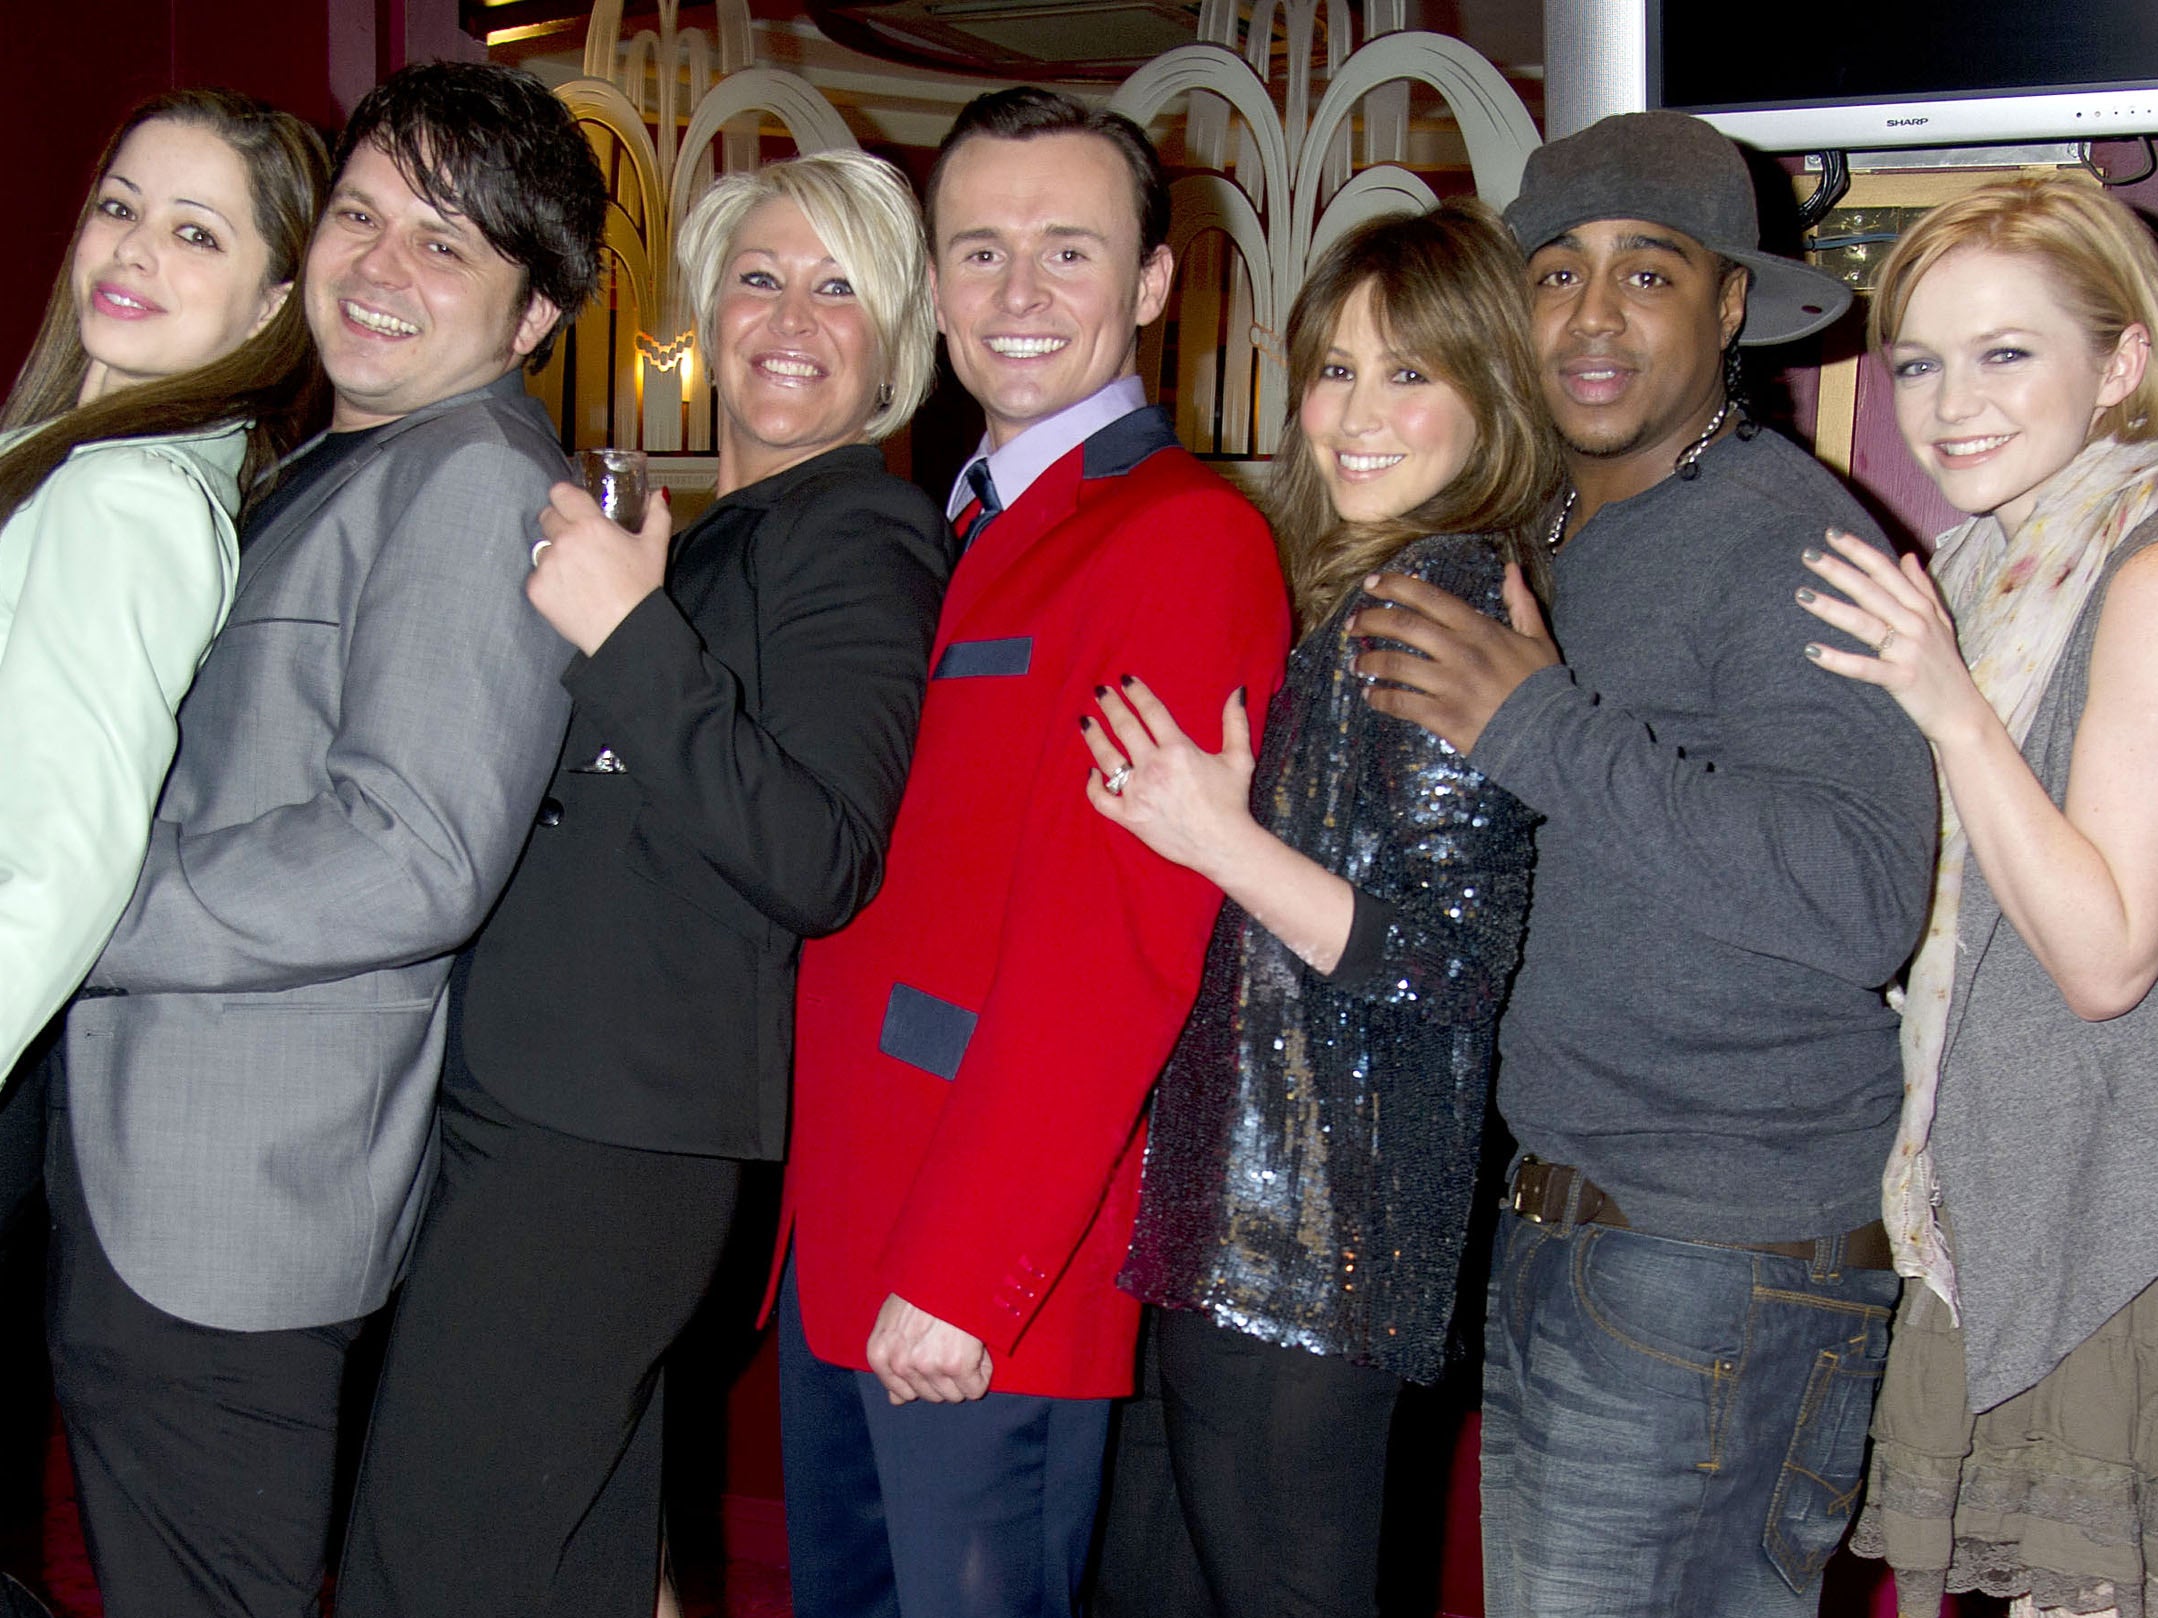 Paul Cattermole, second from left, pictured with his S Club 7 bandmates in 2011